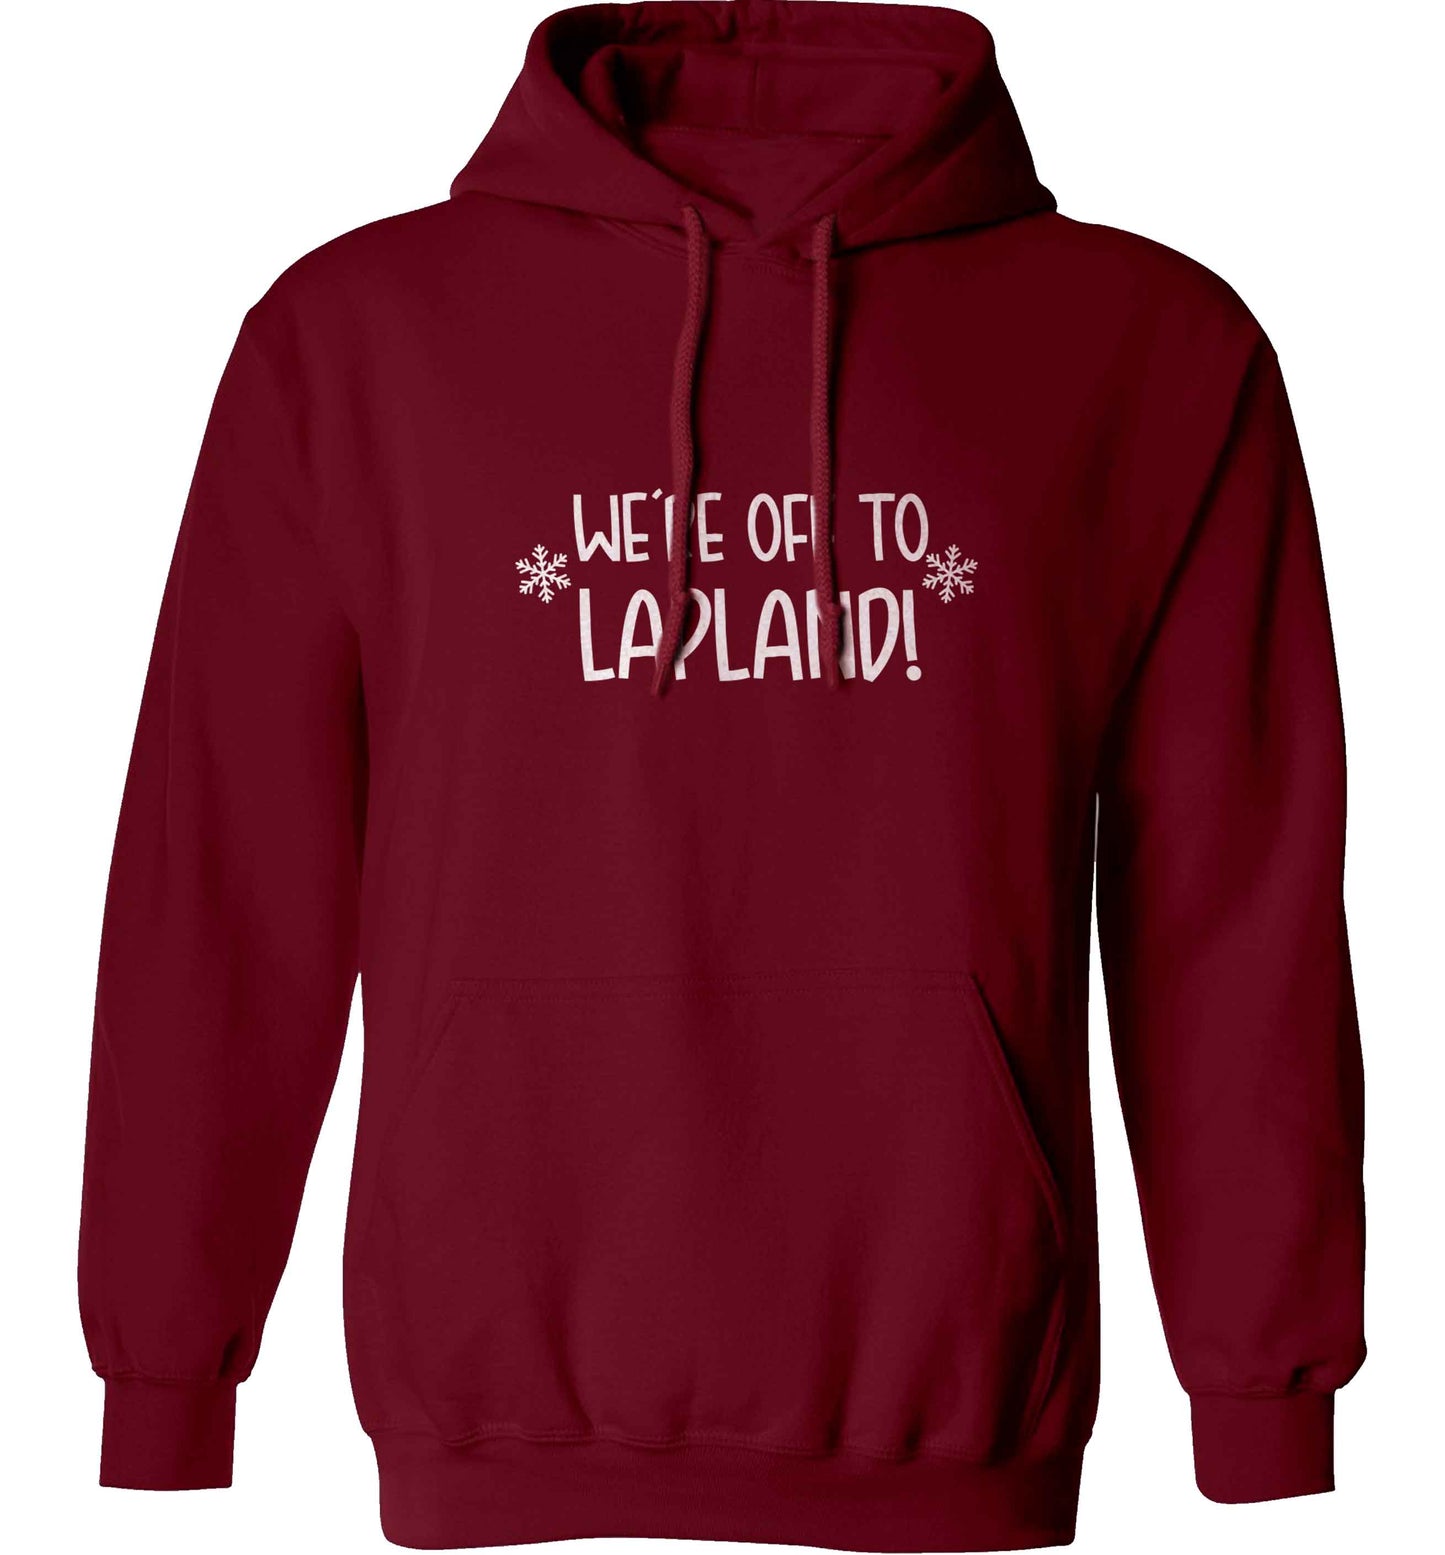 We're off to Lapland adults unisex maroon hoodie 2XL